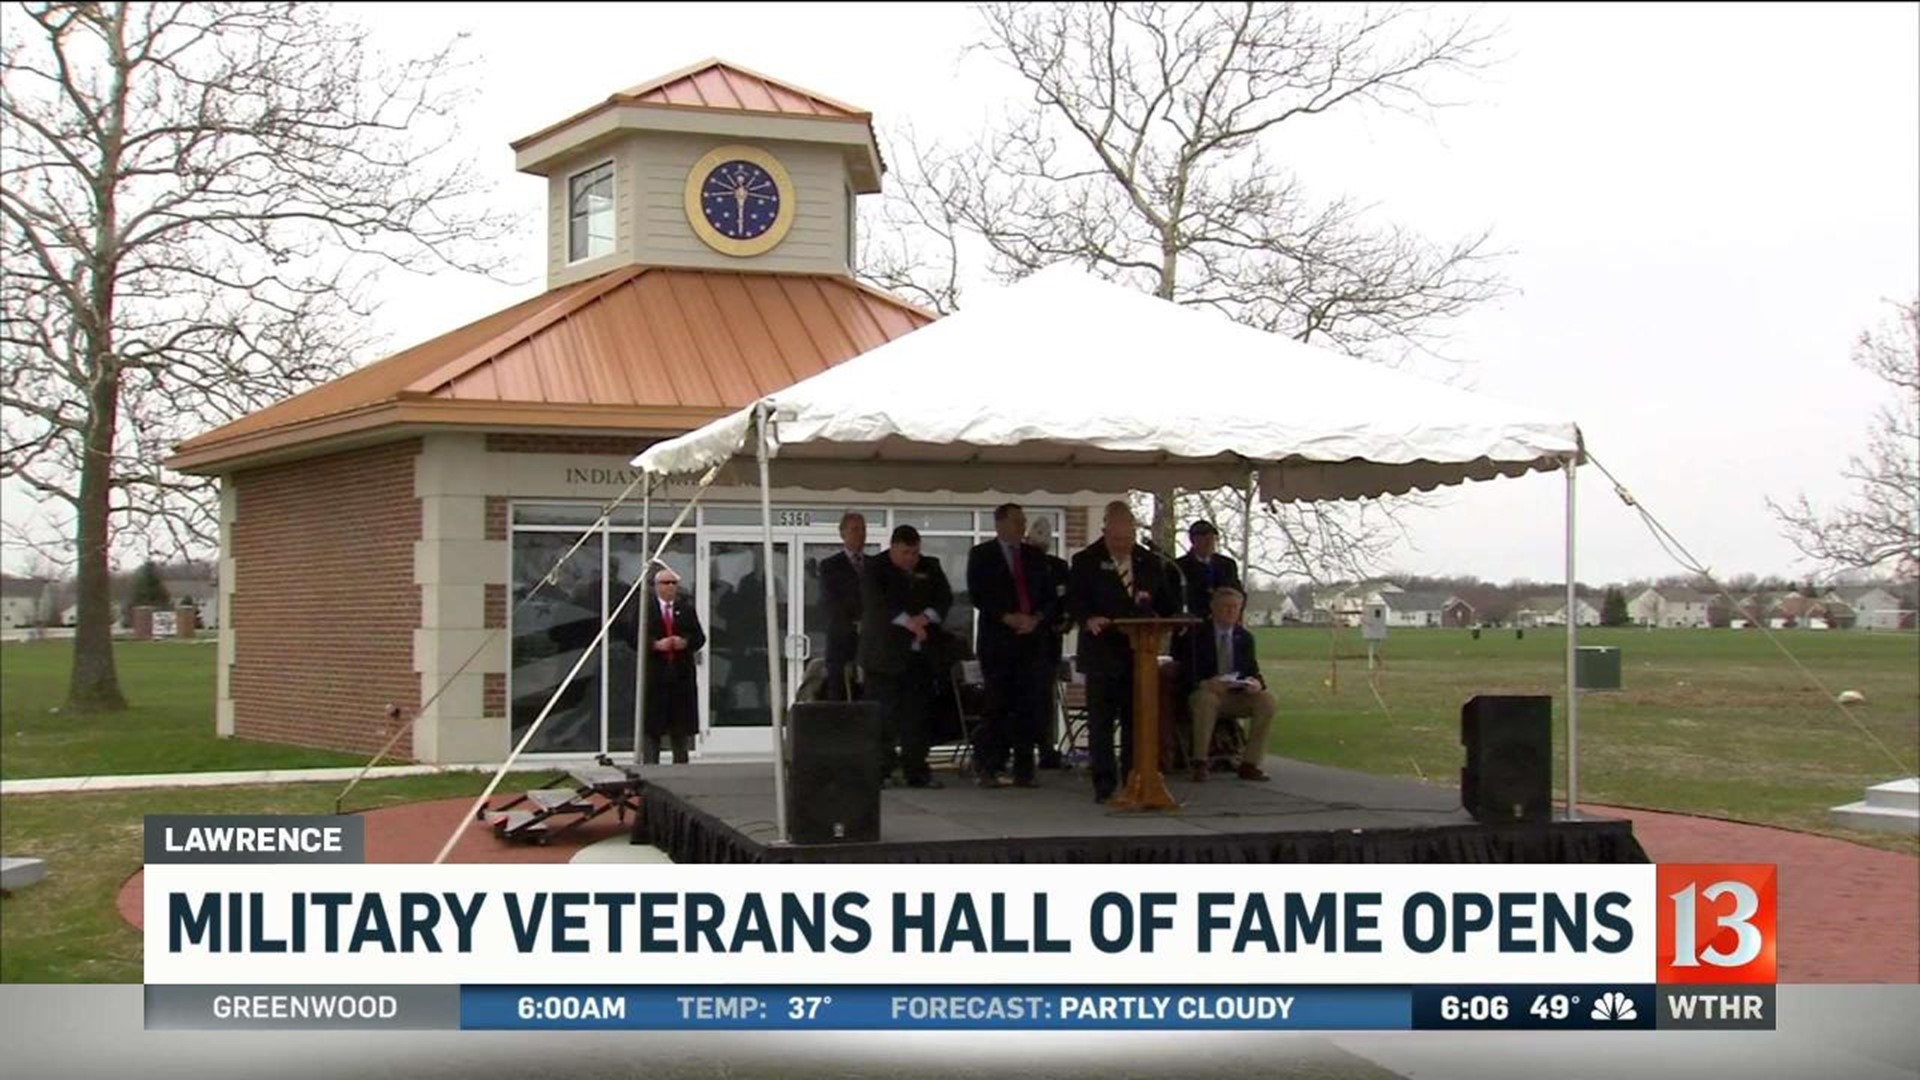 Indiana military veterans hall of fame opens in Lawrence